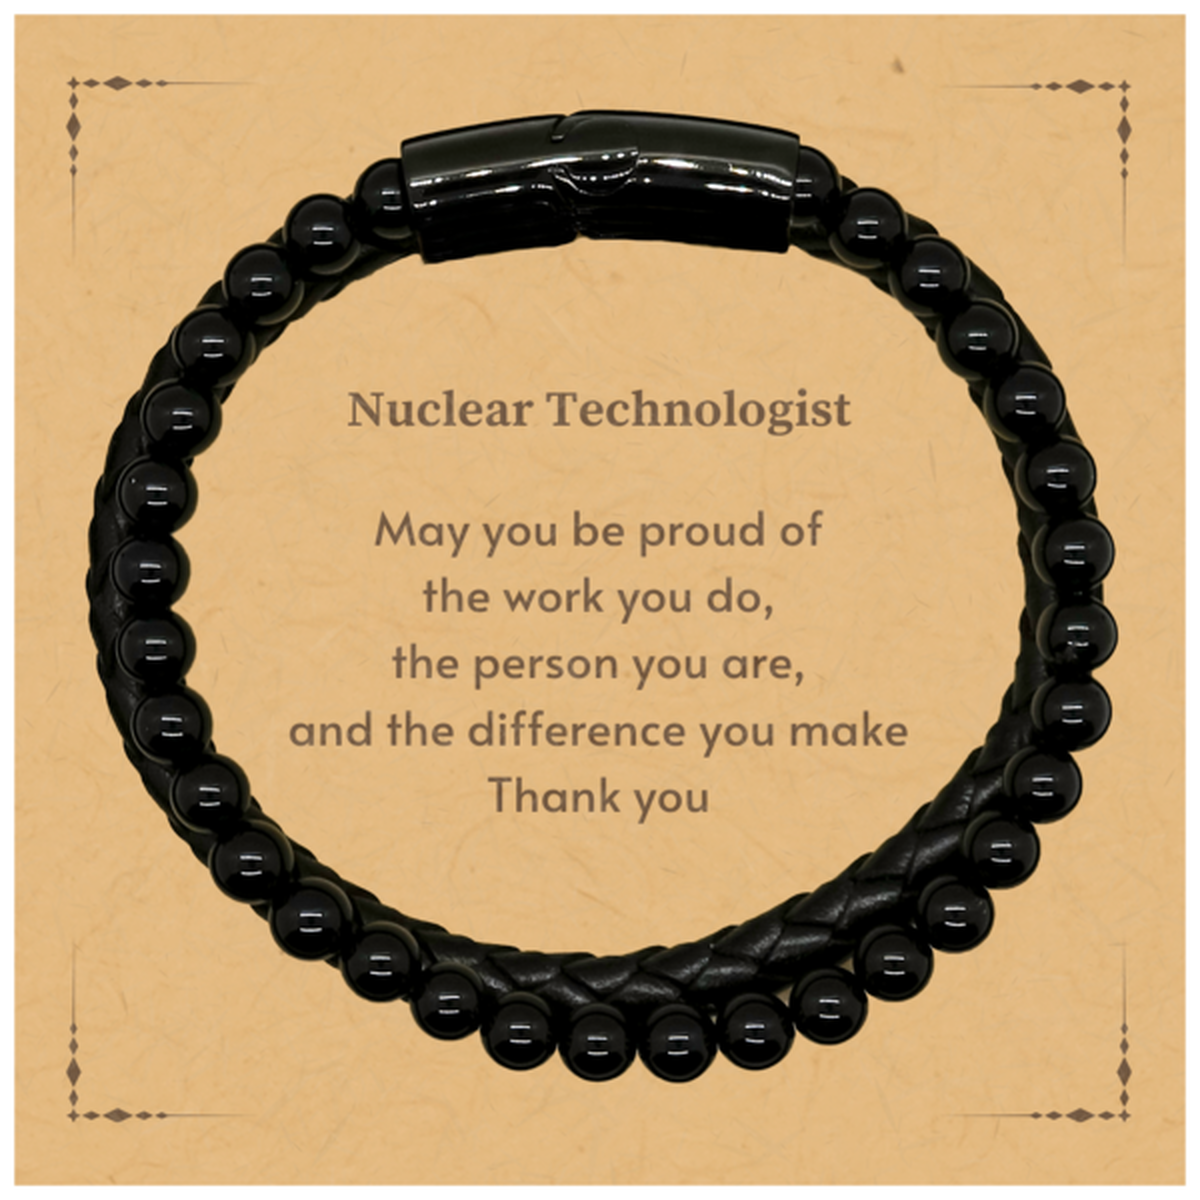 Heartwarming Stone Leather Bracelets Retirement Coworkers Gifts for Nuclear Technologist, Nuclear Technologist May You be proud of the work you do, the person you are Gifts for Boss Men Women Friends